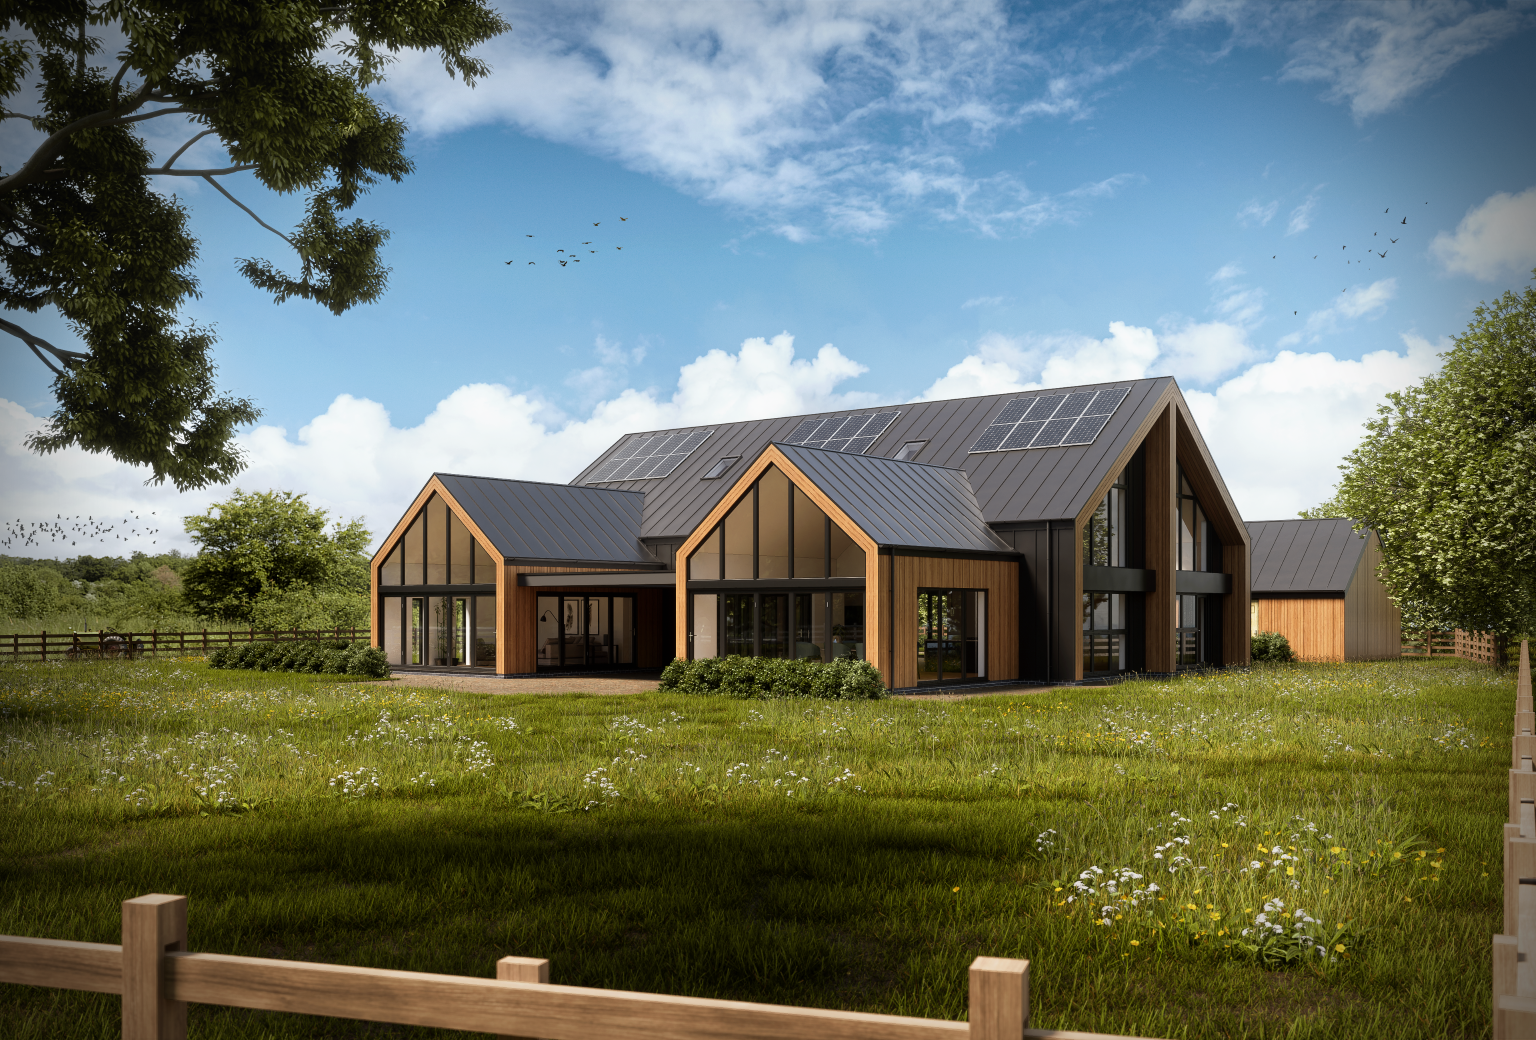 Planning Applications & Architectural Design: Everything you need to gain planning permission for your barn conversion